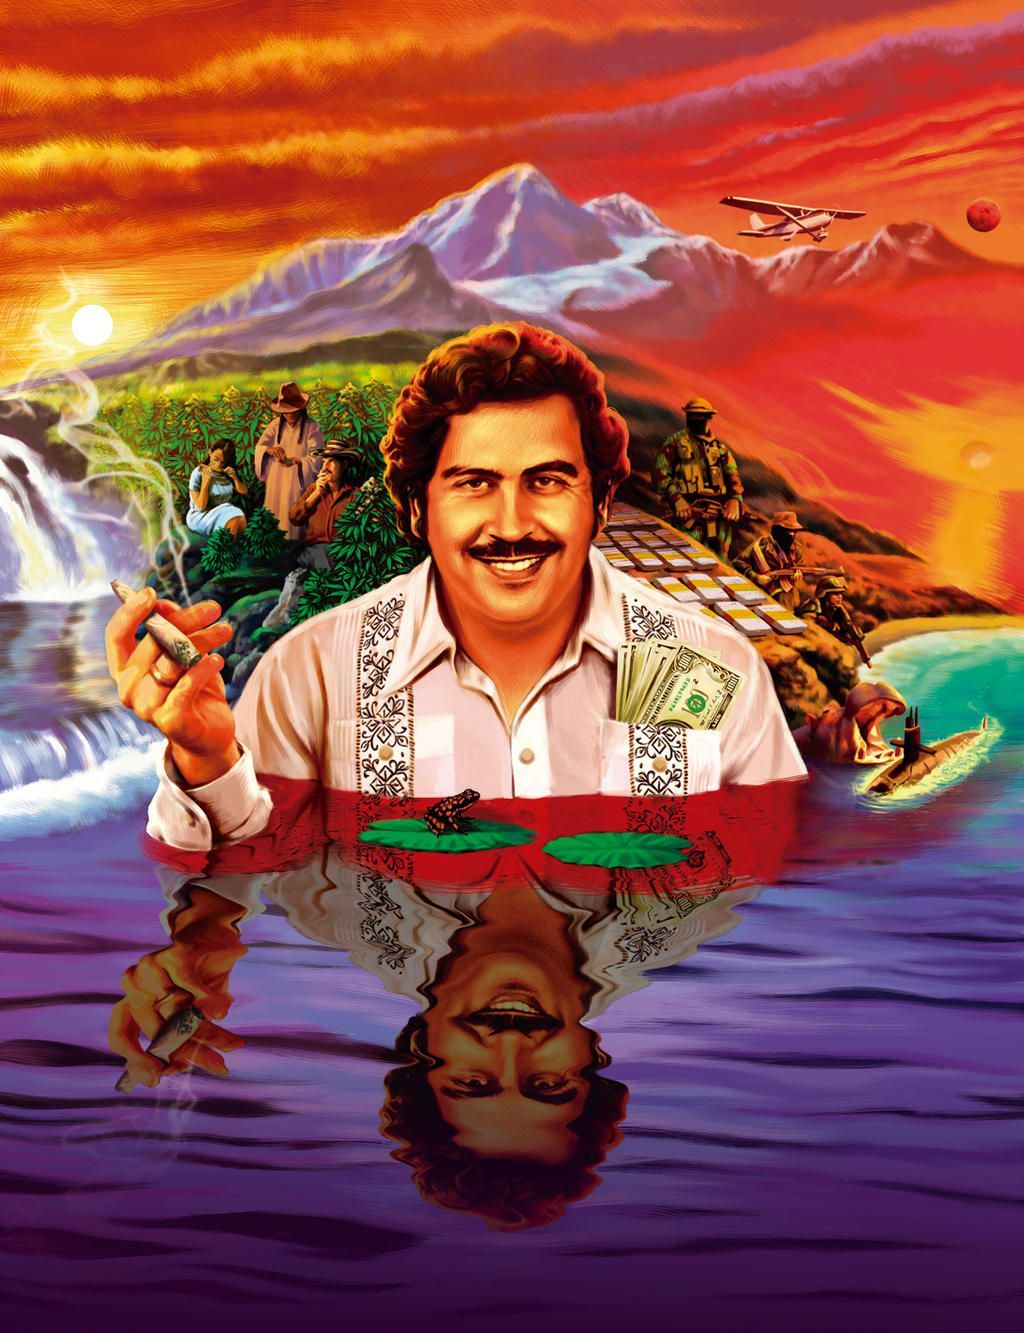 Lefgnmyi ALEC Monopolies Pablo Escobar Wallpaper HD Canvas Posters Prints  Wall Art Oil Painting Decorative Modern Home Decoration20x28 in No Frame   Amazoncomau Home